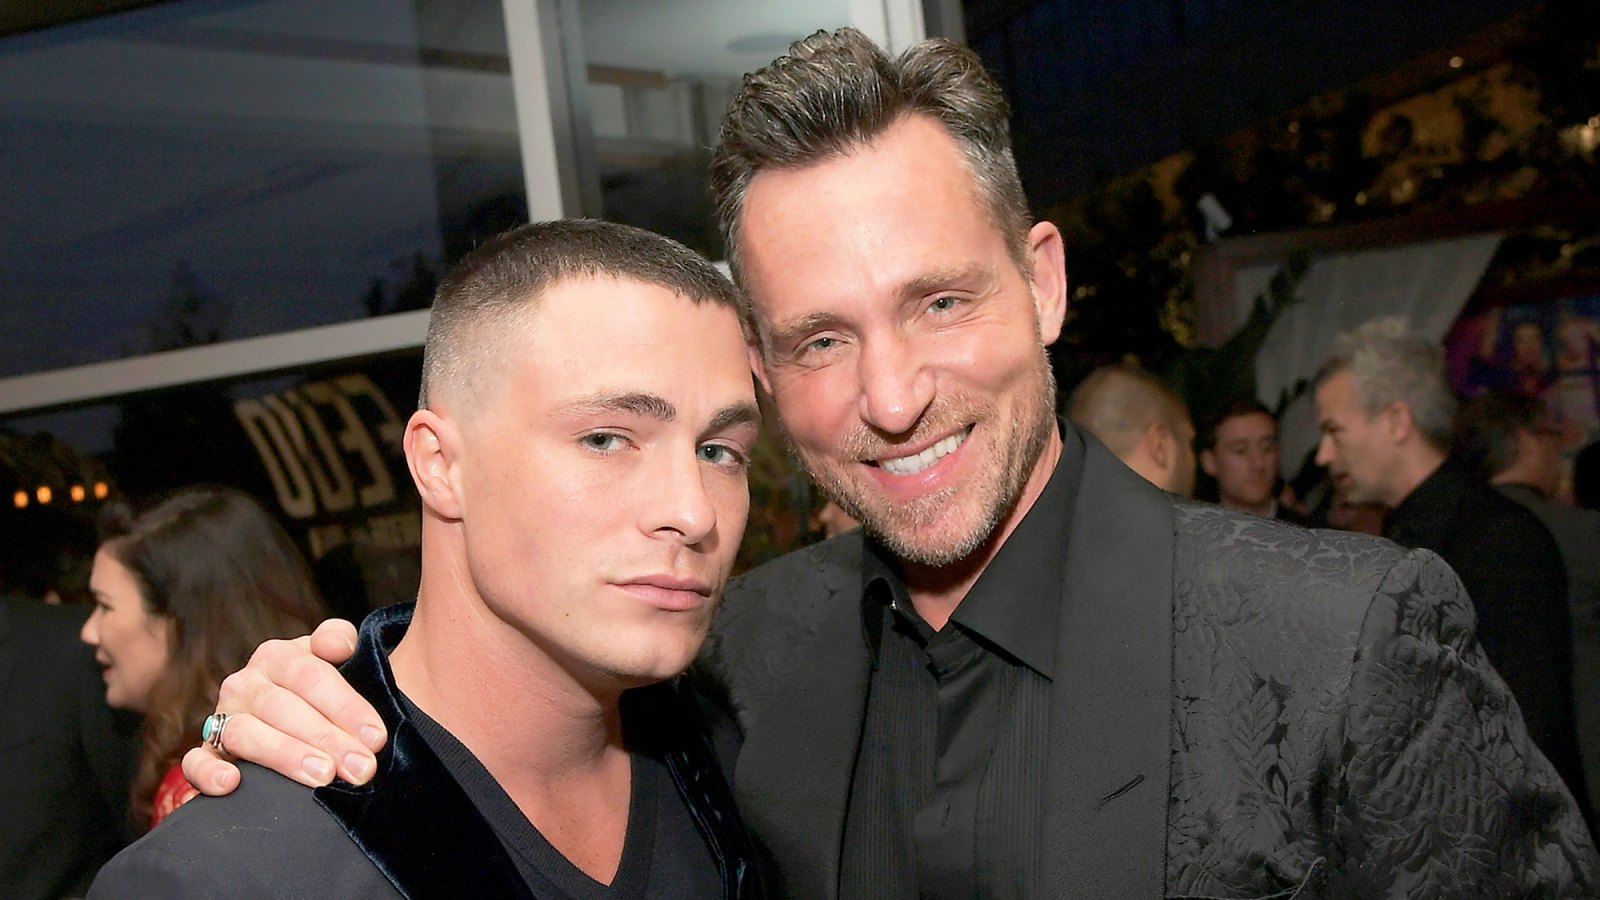 Colton Haynes and Jeff Leatham attend FX Networks 2017 celebration of their Emmy nominees at Craft in Century City, California.